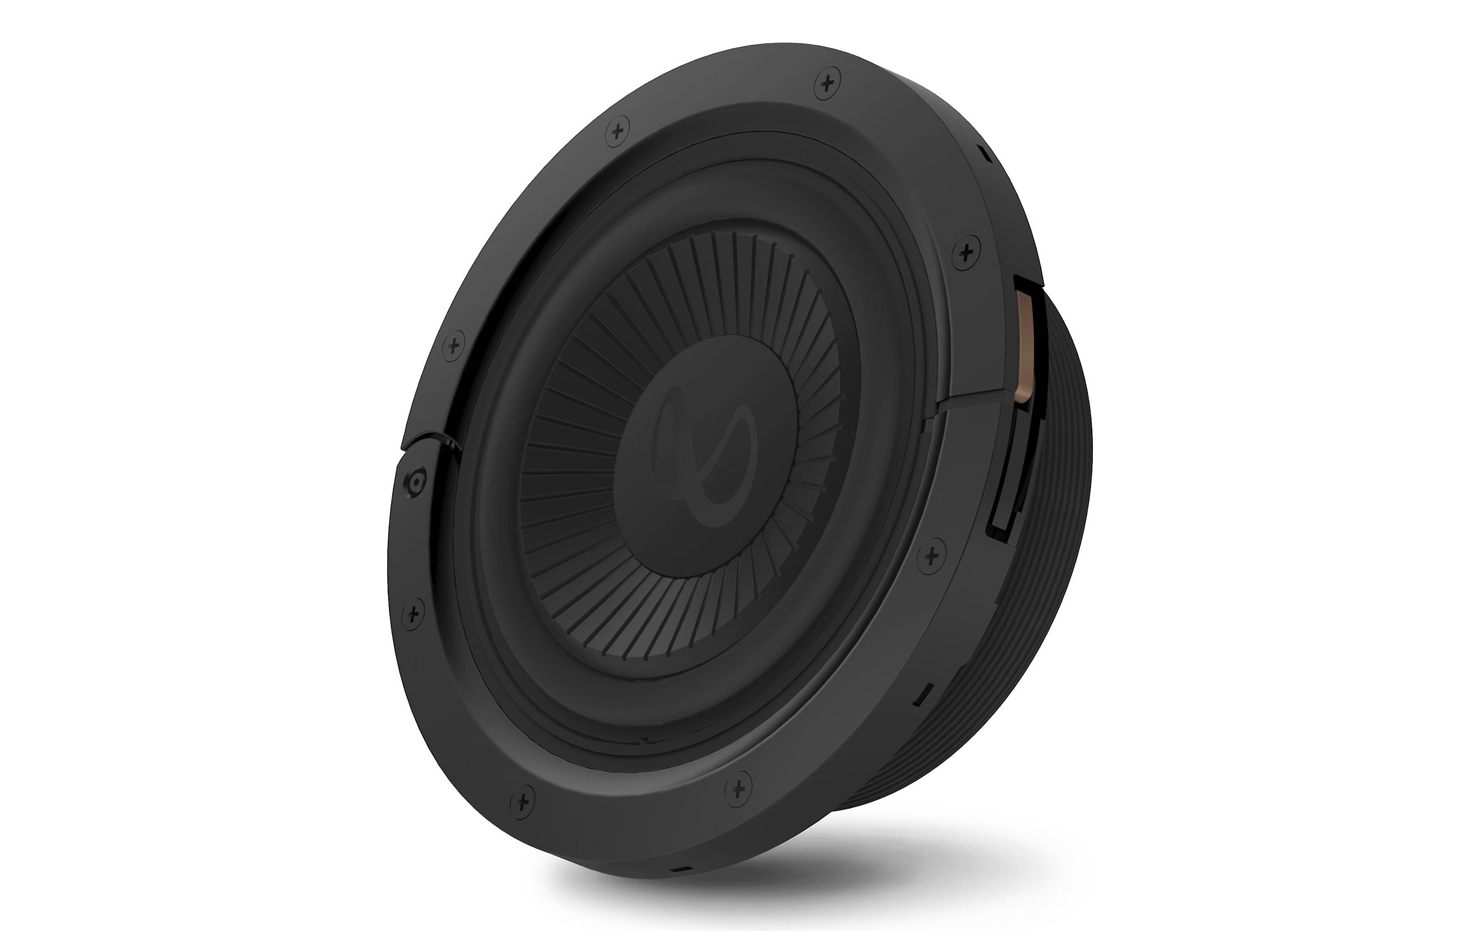 Single or Dual 2-Ohm Voice Coil Options